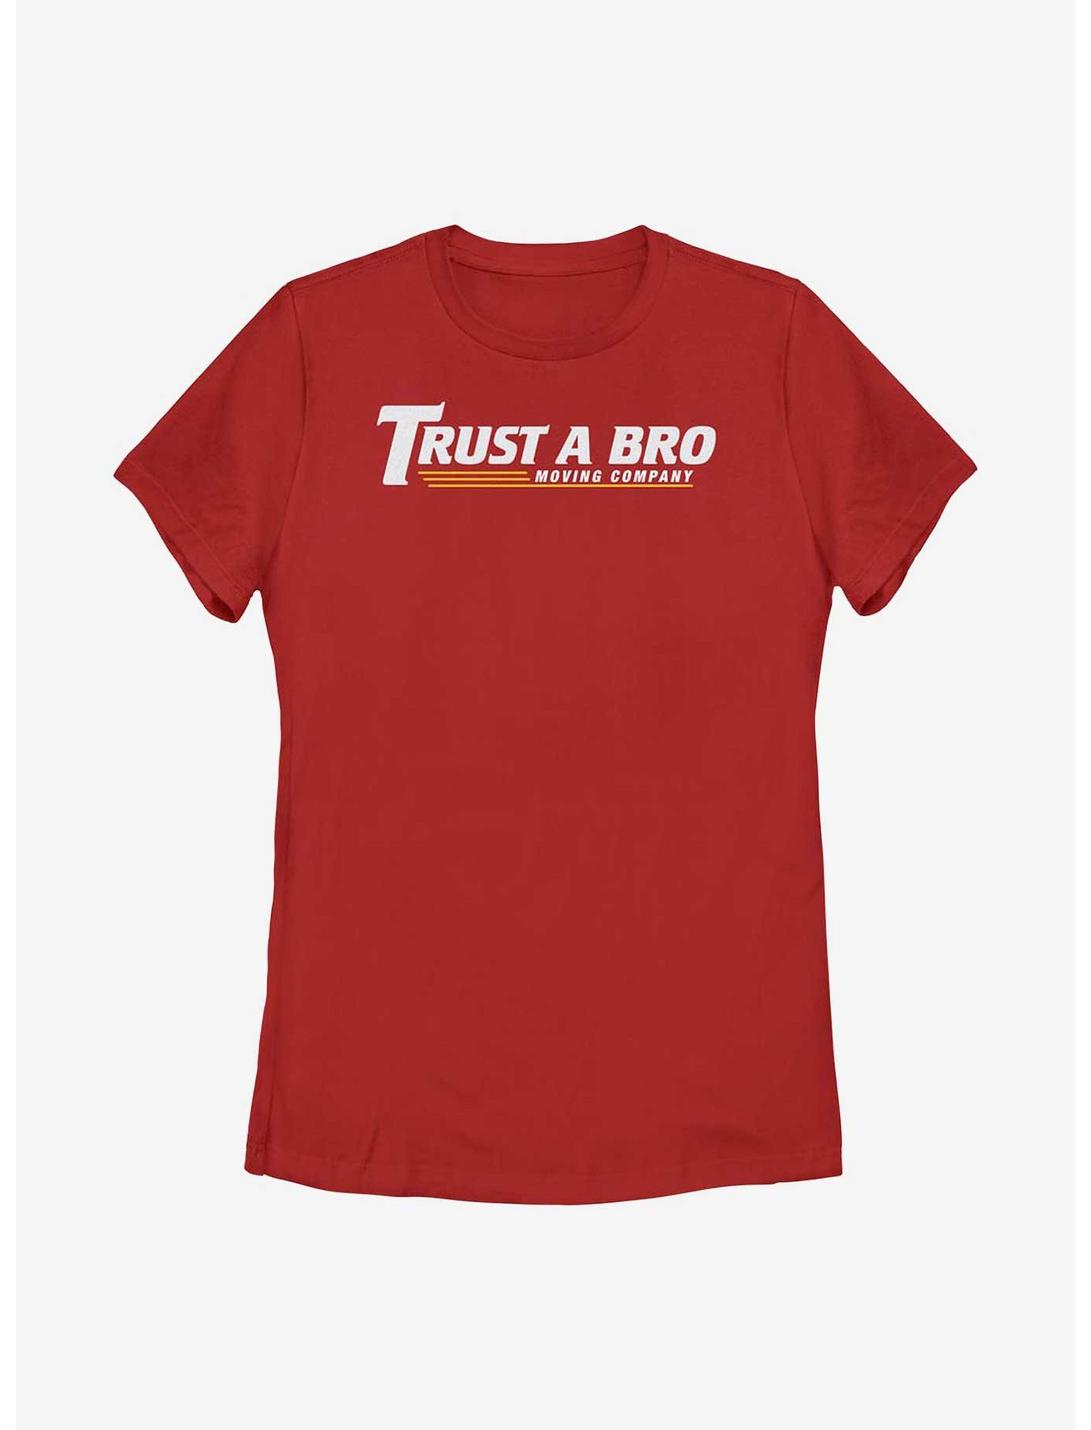 Marvel Hawkeye Trust A Bro Moving Company Womens T-Shirt, RED, hi-res